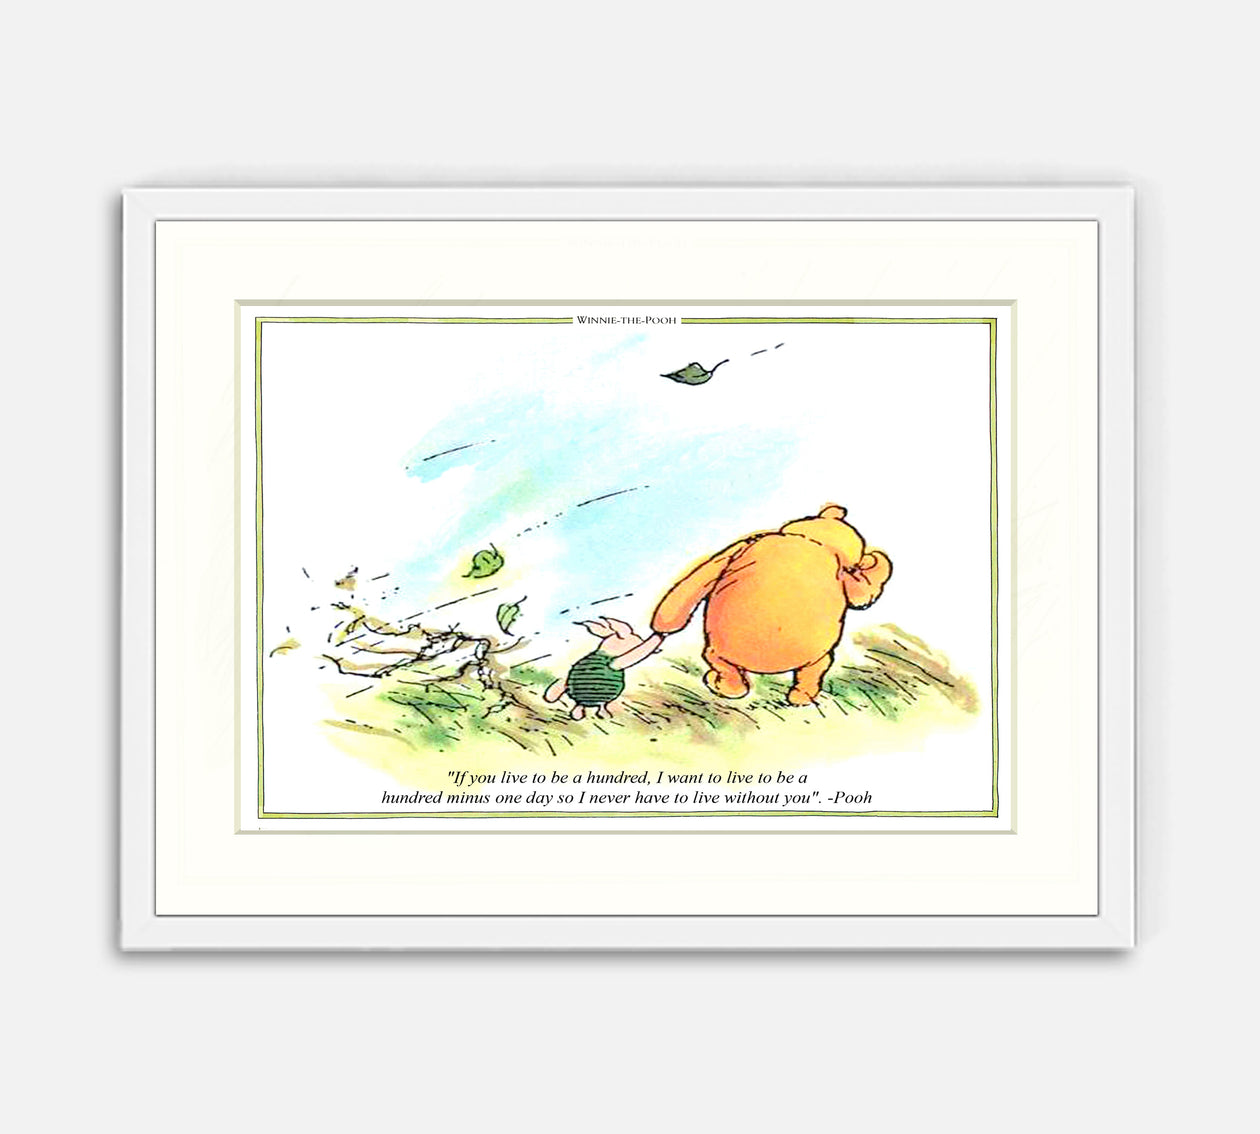 Winnie the Pooh Print: If You Live to be a Hundred